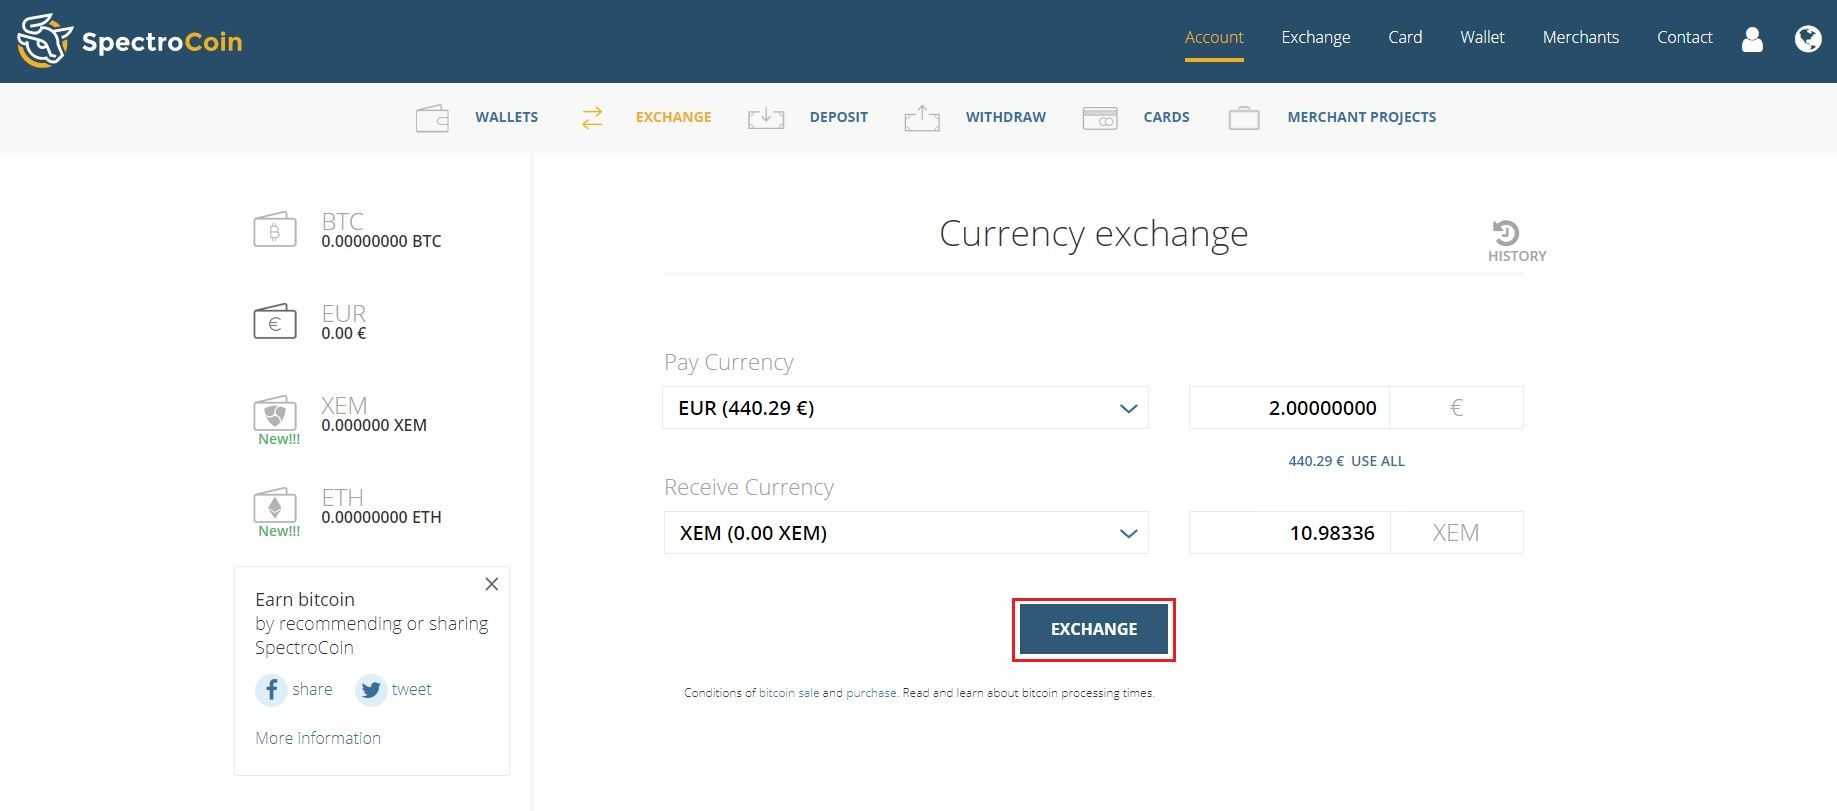 SpectroCoin "currency exchange" page 